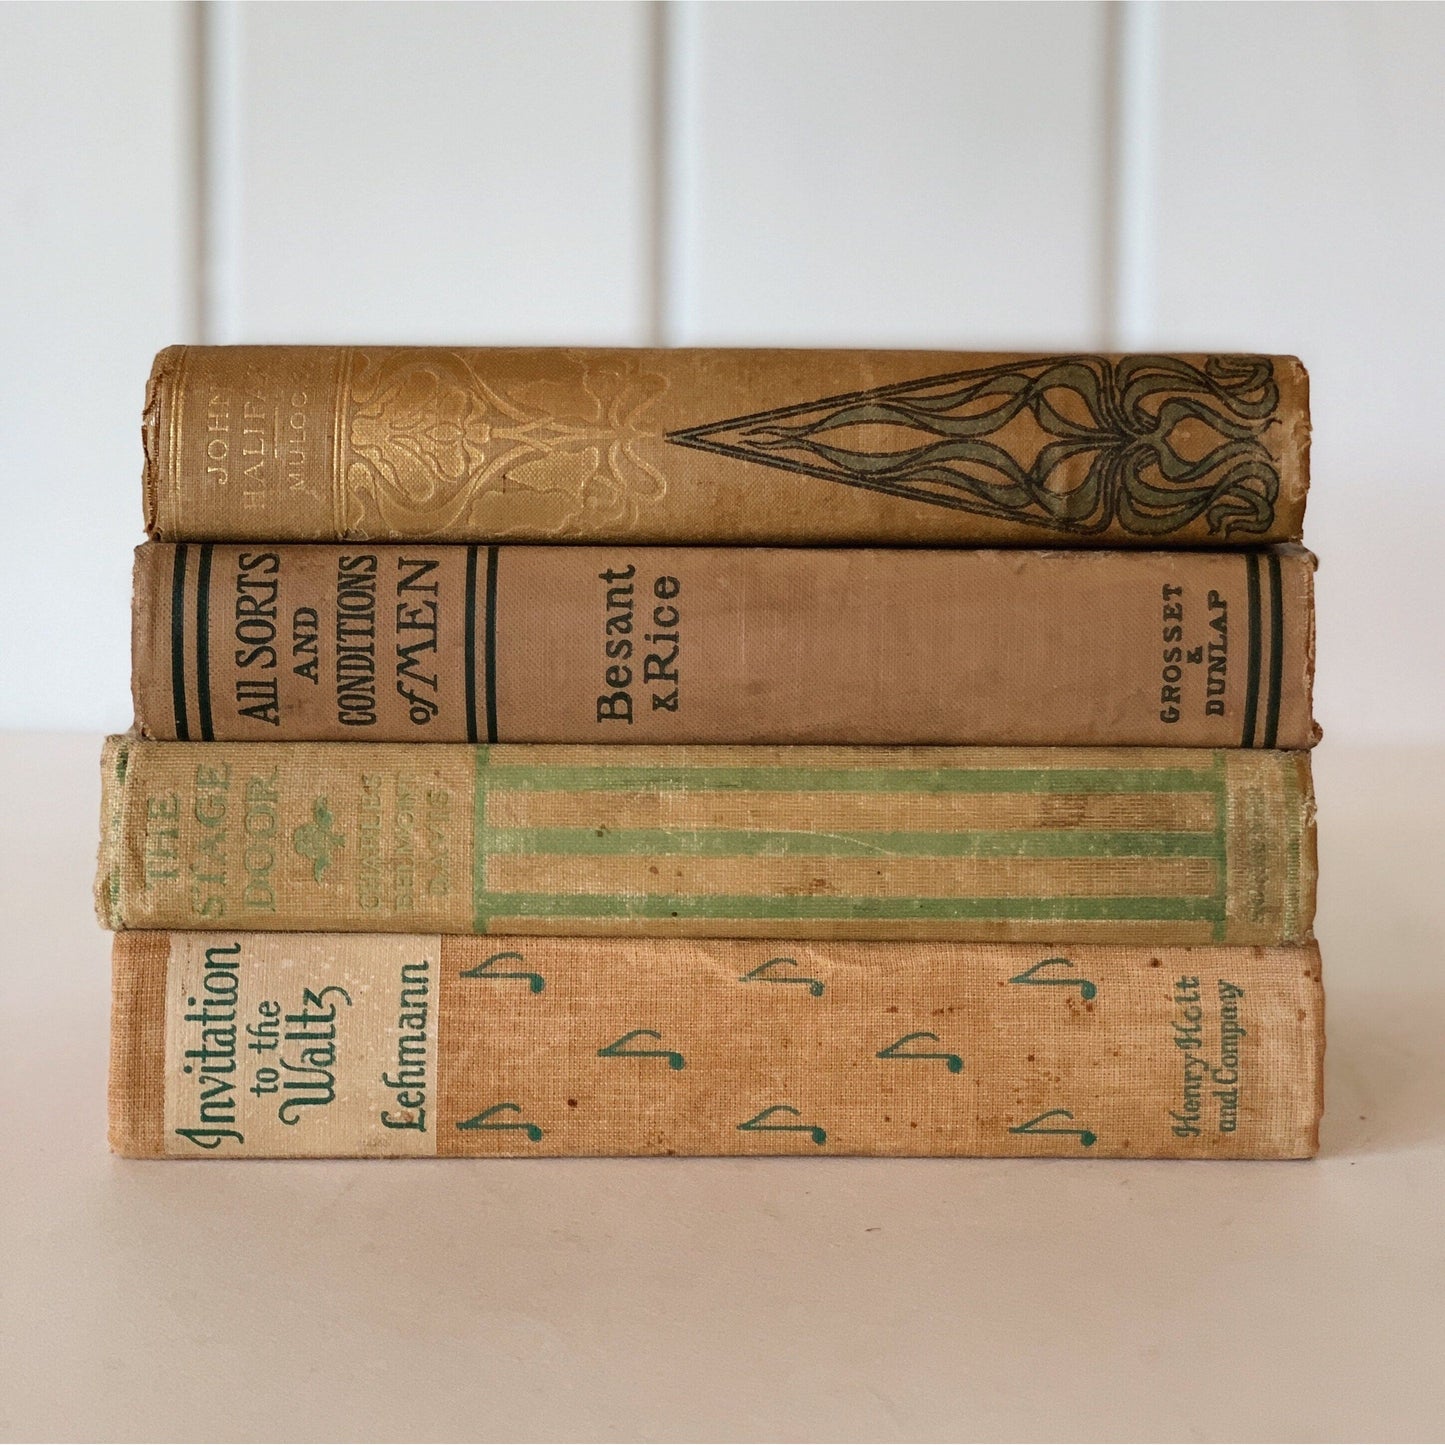 Antique Beige and Green Ornate Books for Shelf Styling, Cozy Faded Decorative Book Spines